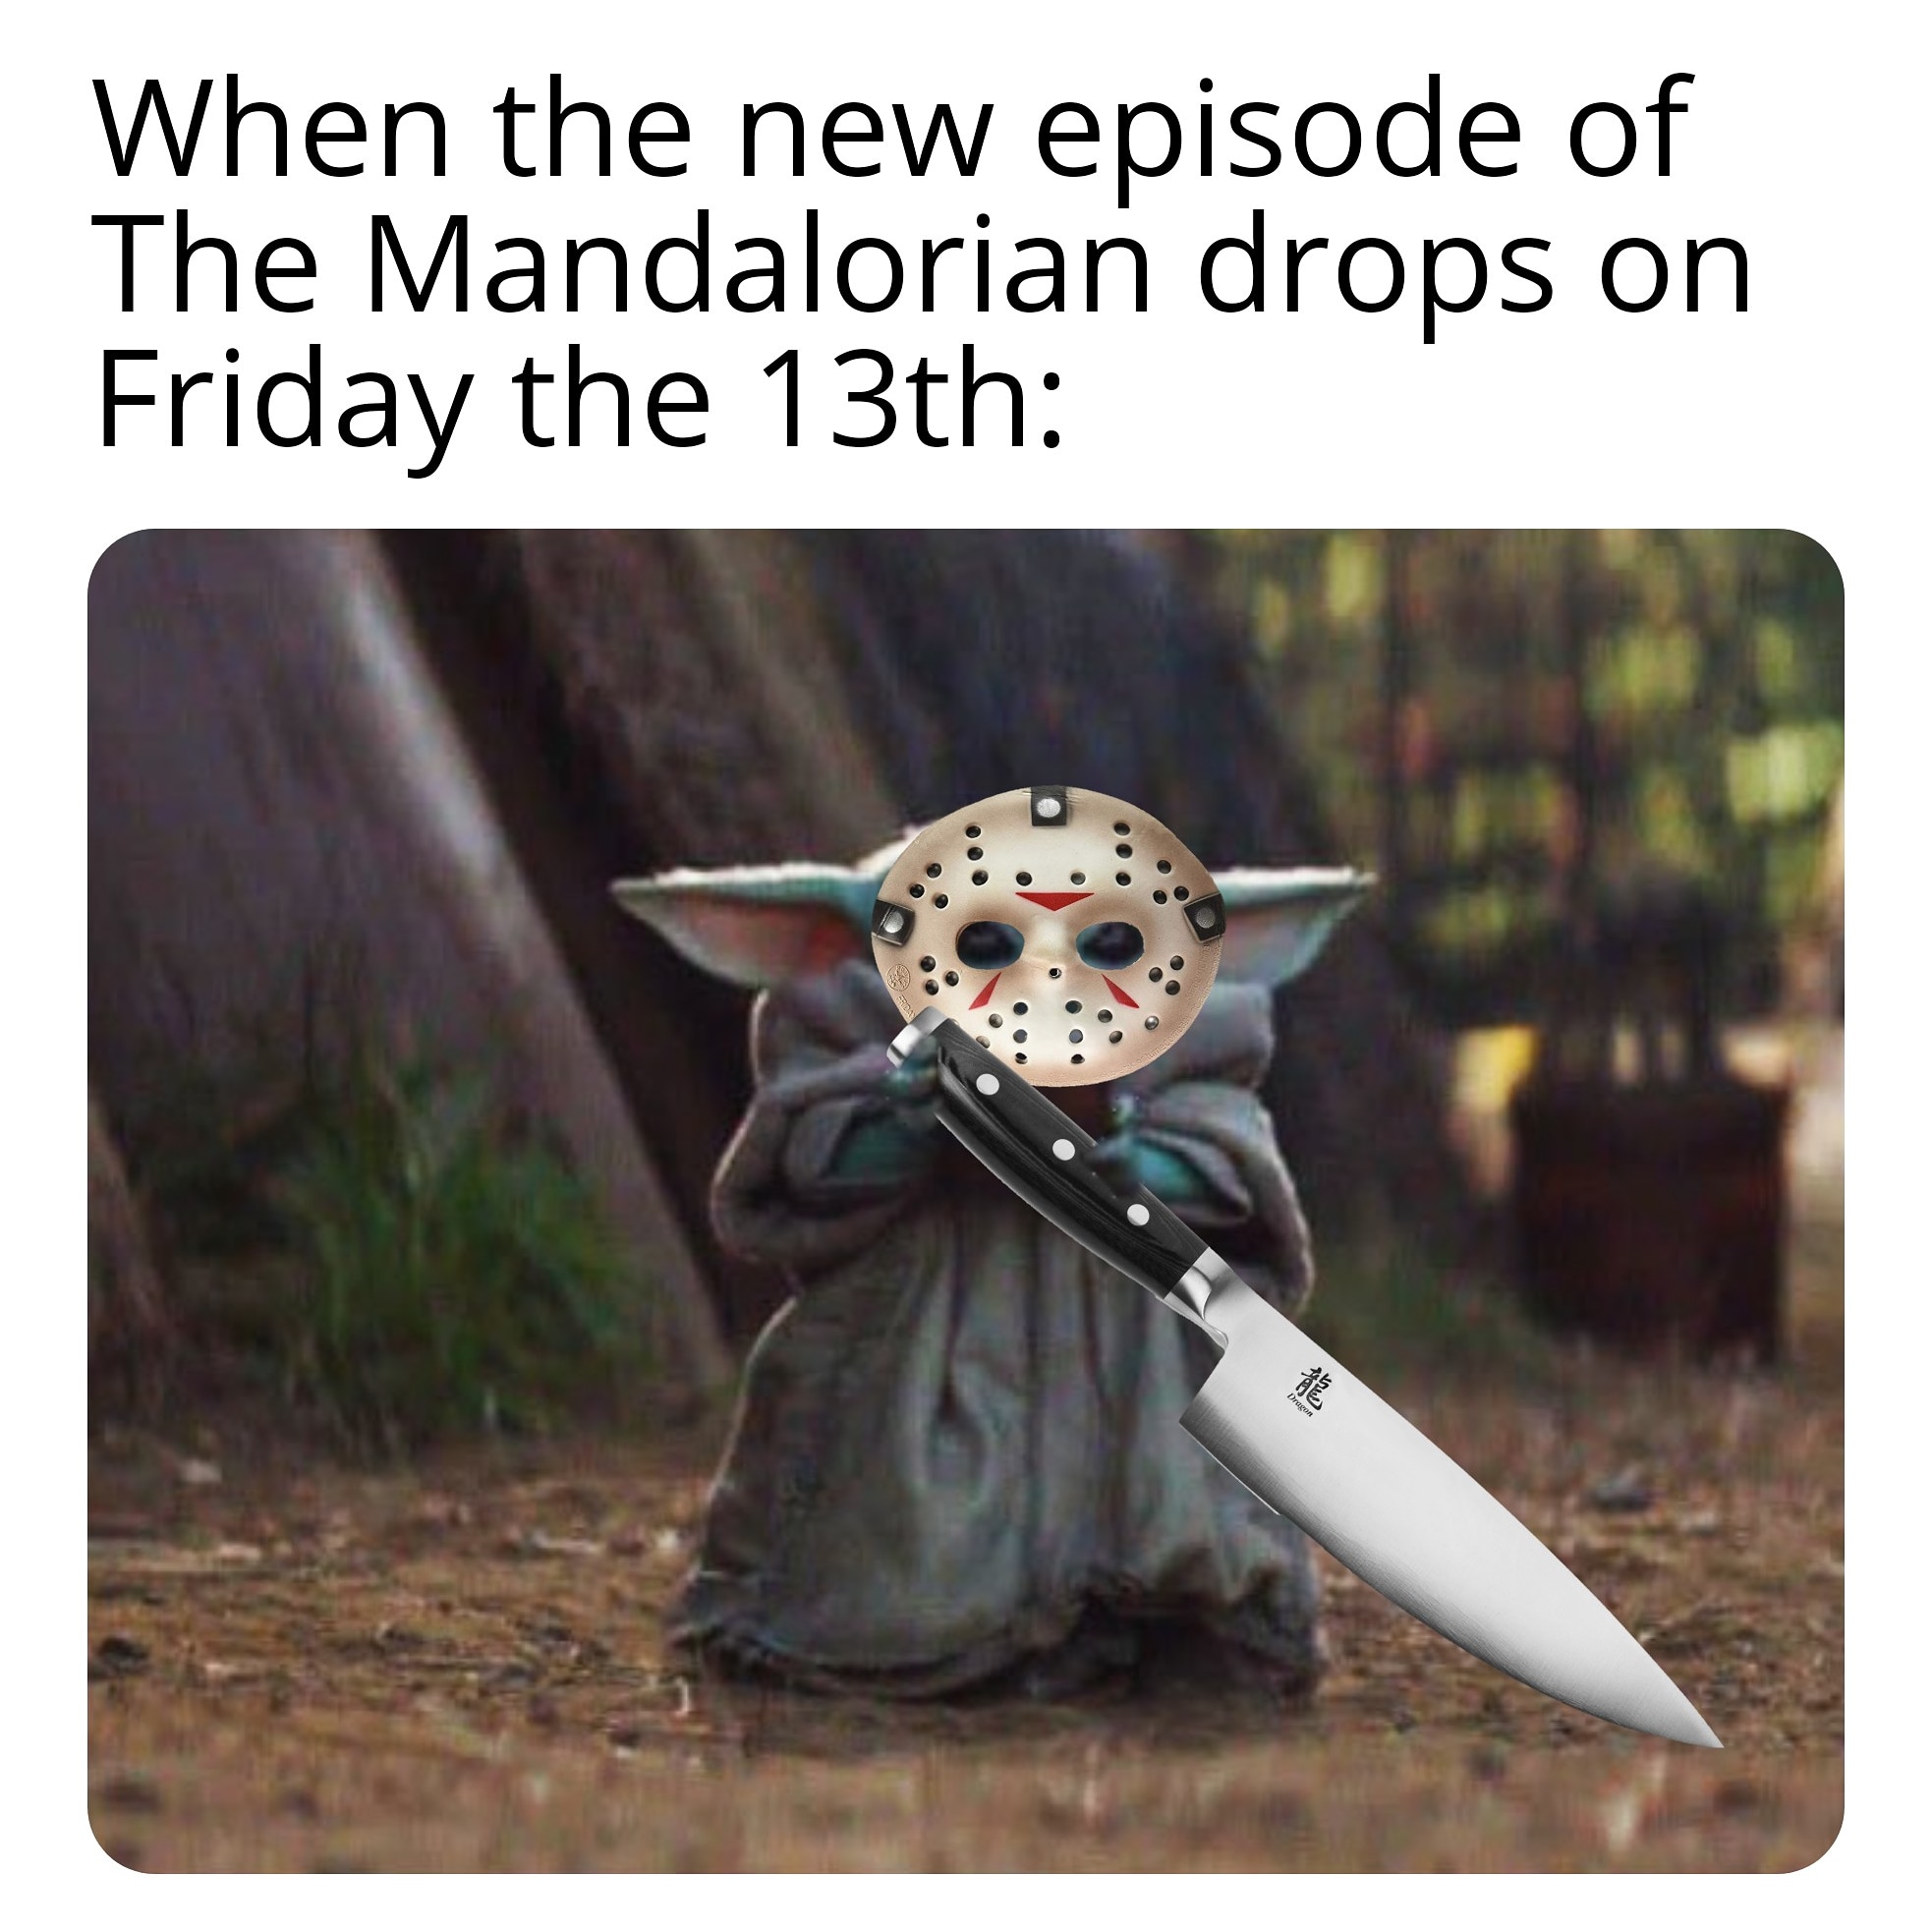 baby yoda meme template - When the new episode of The Mandalorian drops on Friday the 13th